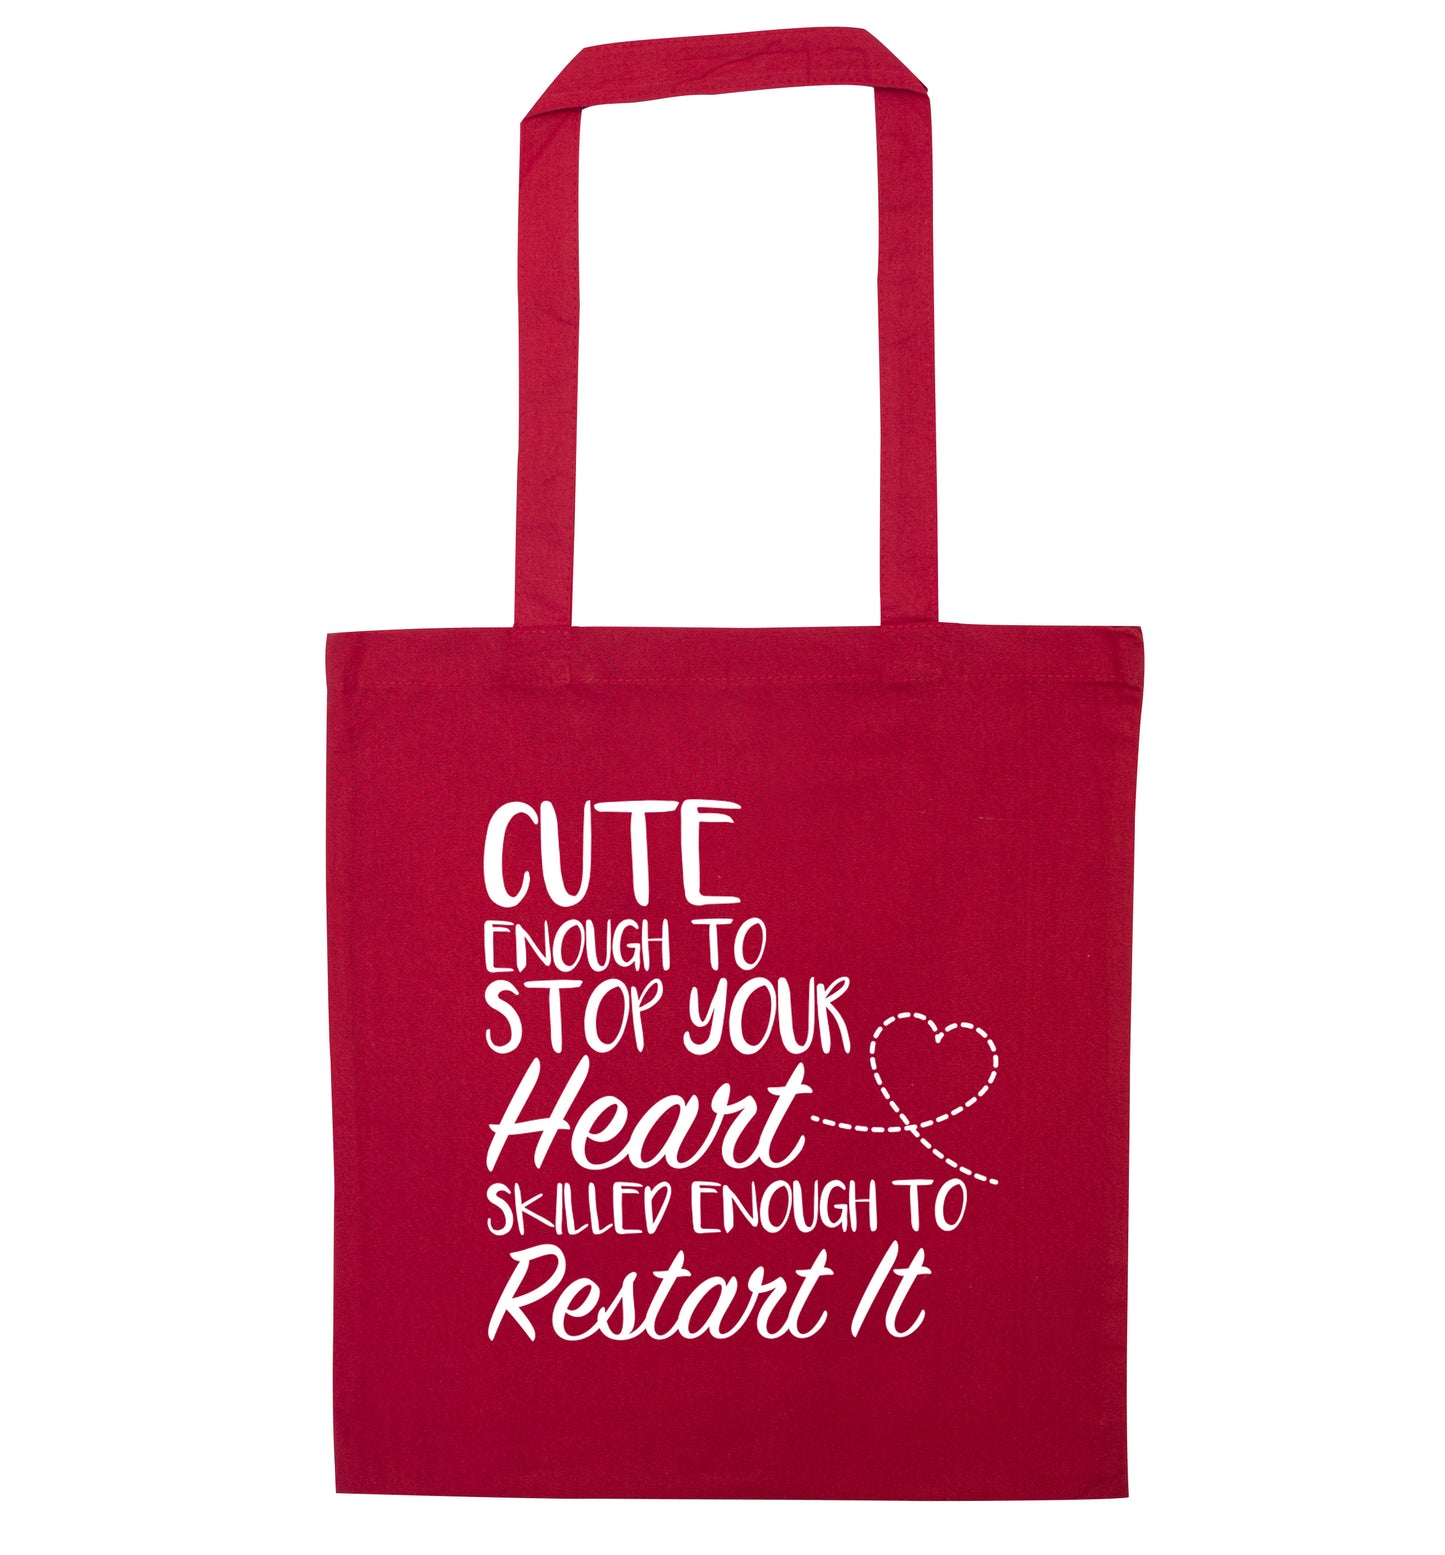 Cute enough to stop your heart skilled enough to restart it red tote bag